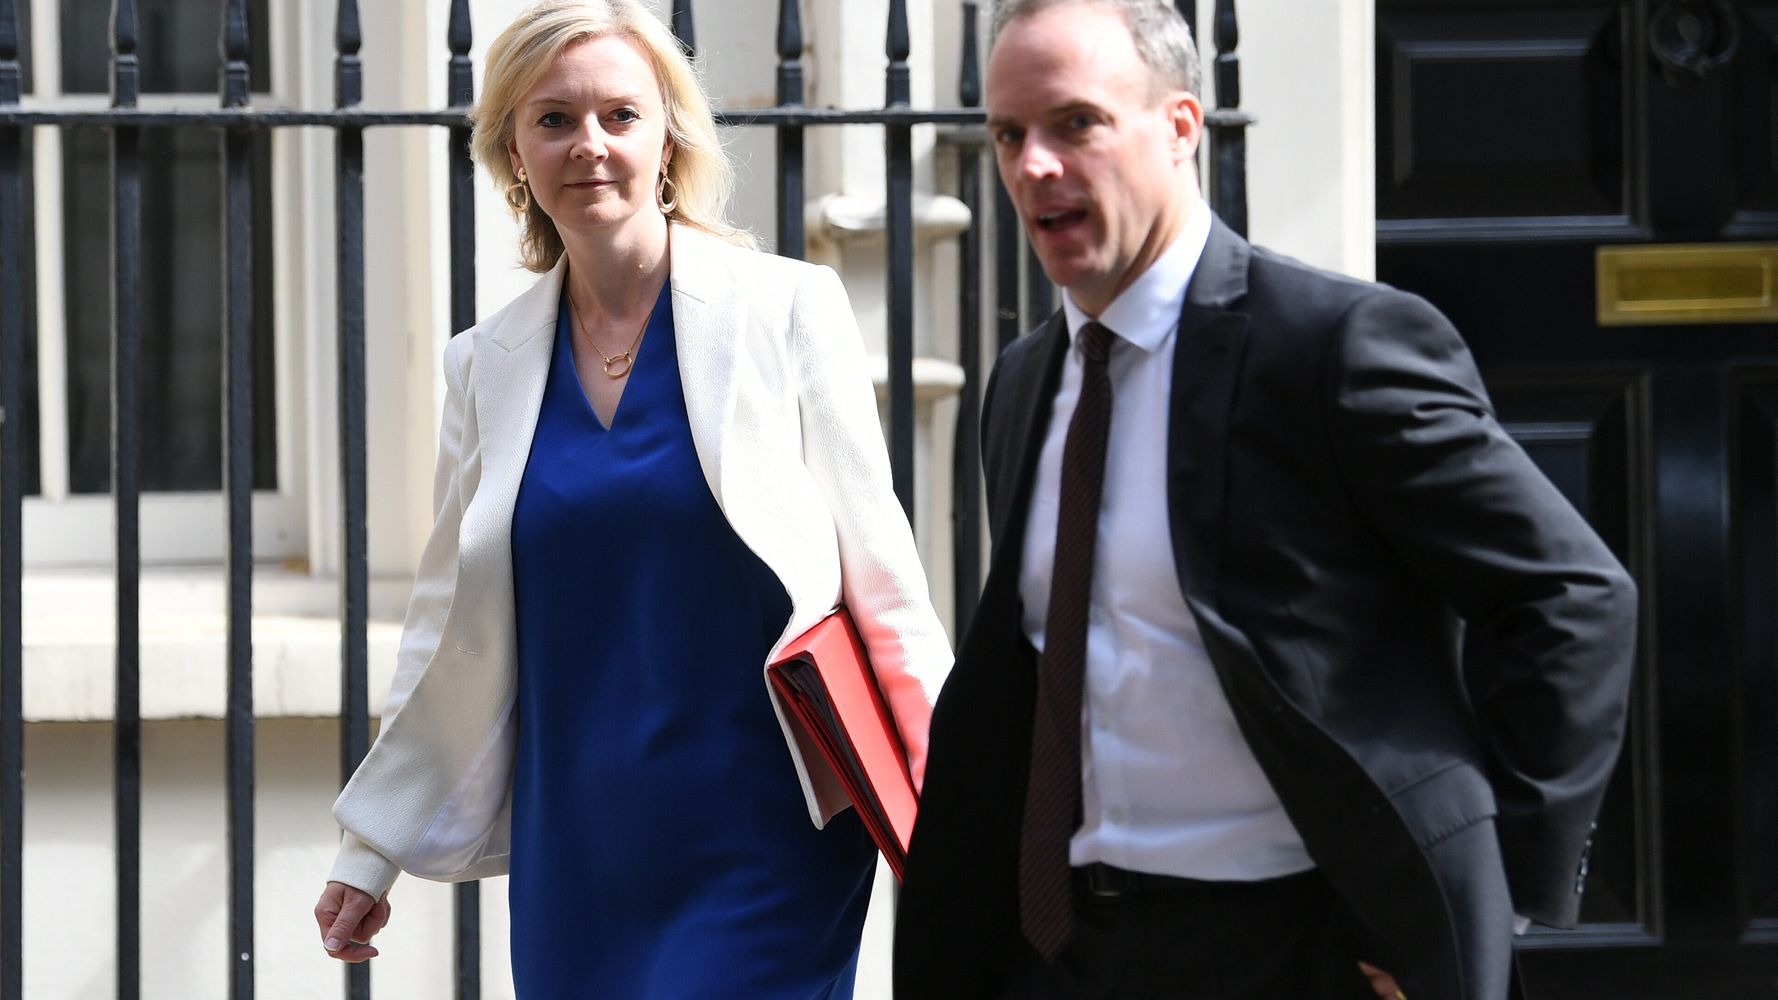 Liz Truss's Economic Plans An 'Electoral Suicide Note' For The Tories, Says Dominic Raab